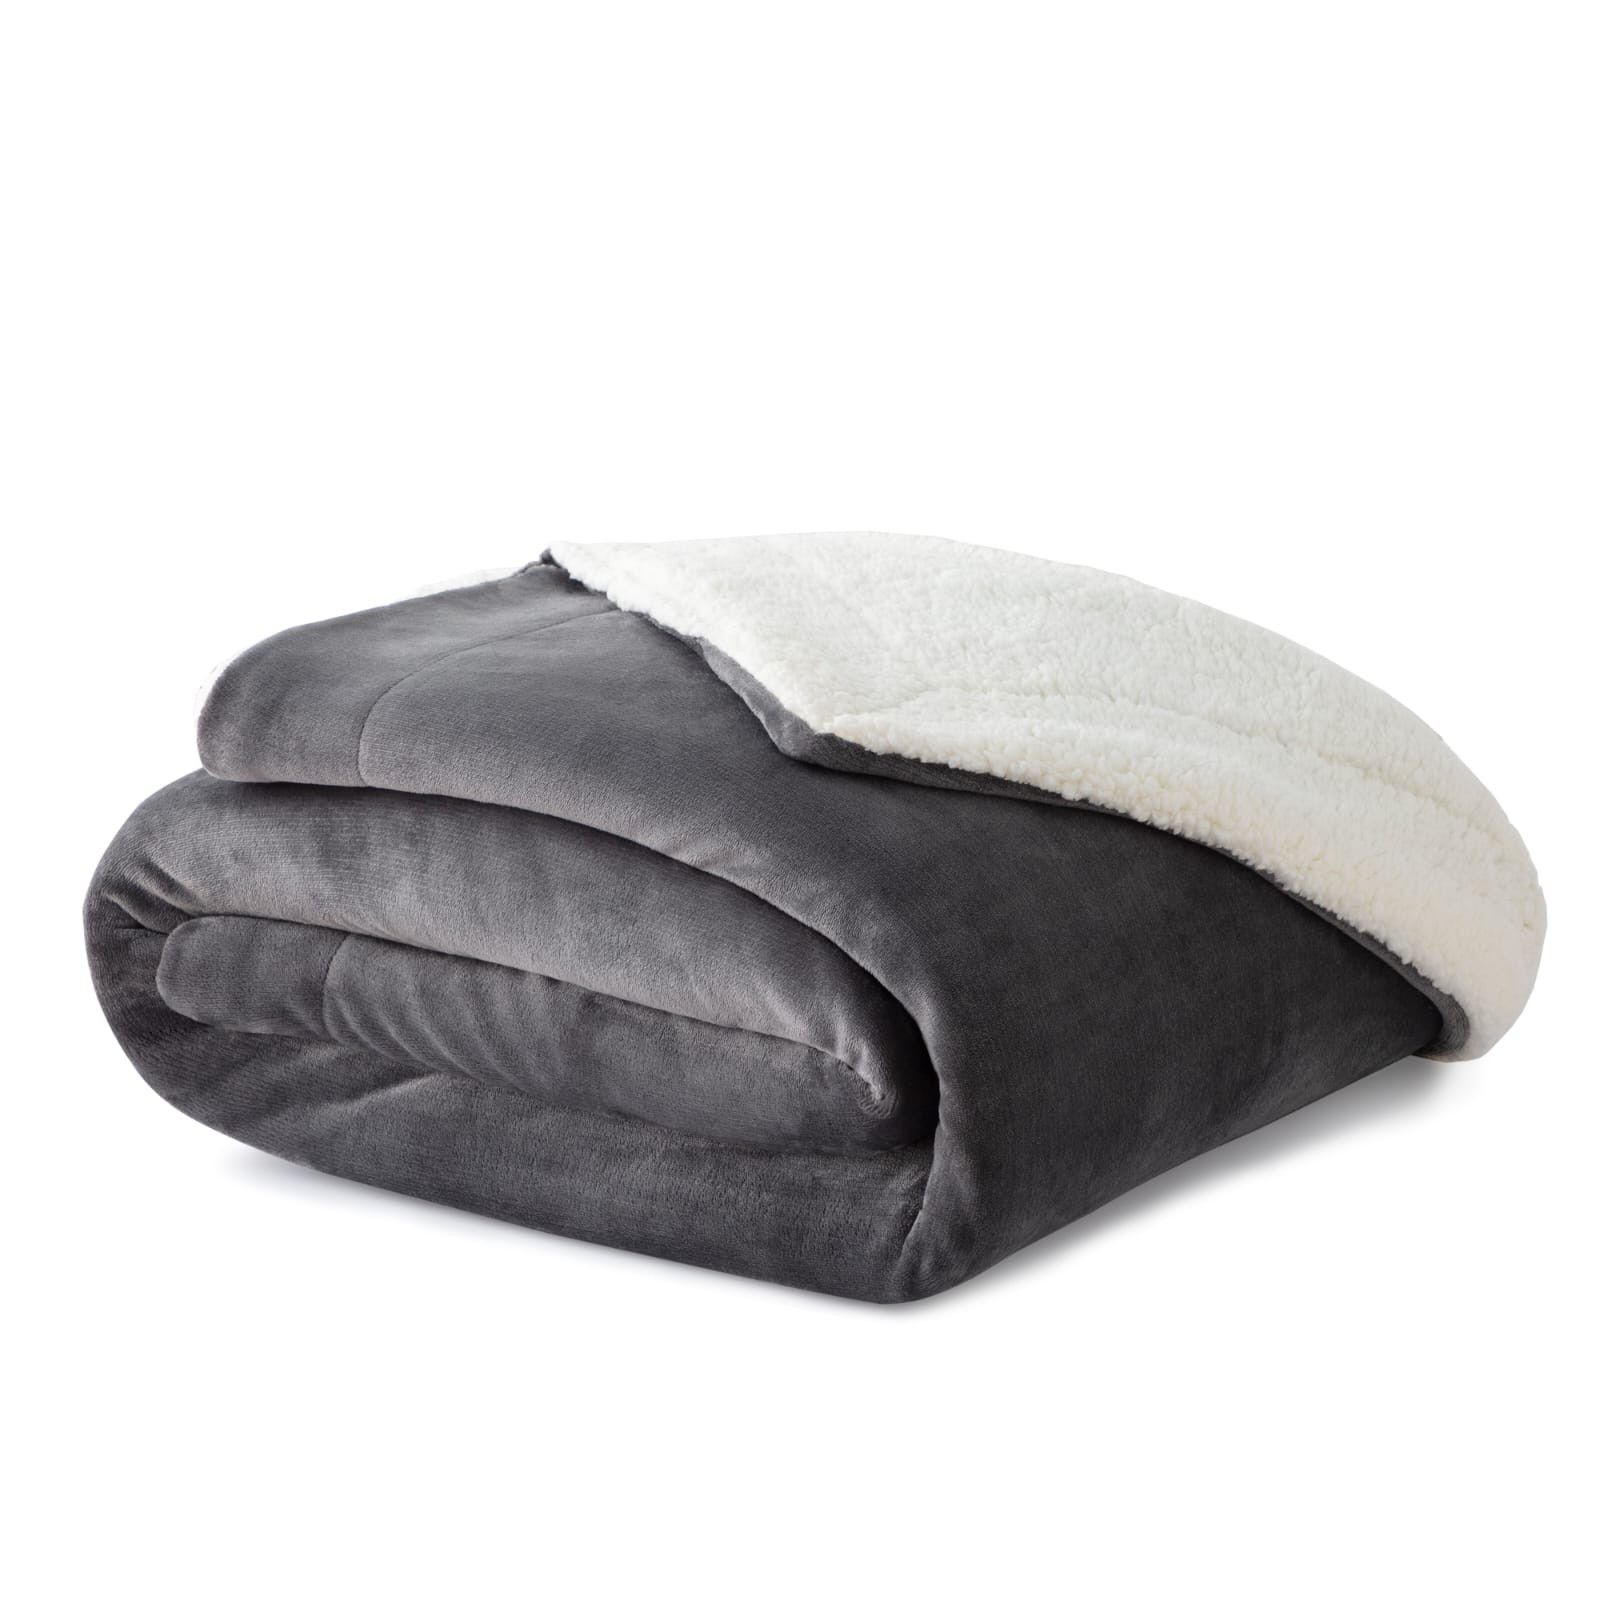 Super Comfy Sherpa Blanket Queen Size Great Addition To A Brand New Mattress And Bed Set